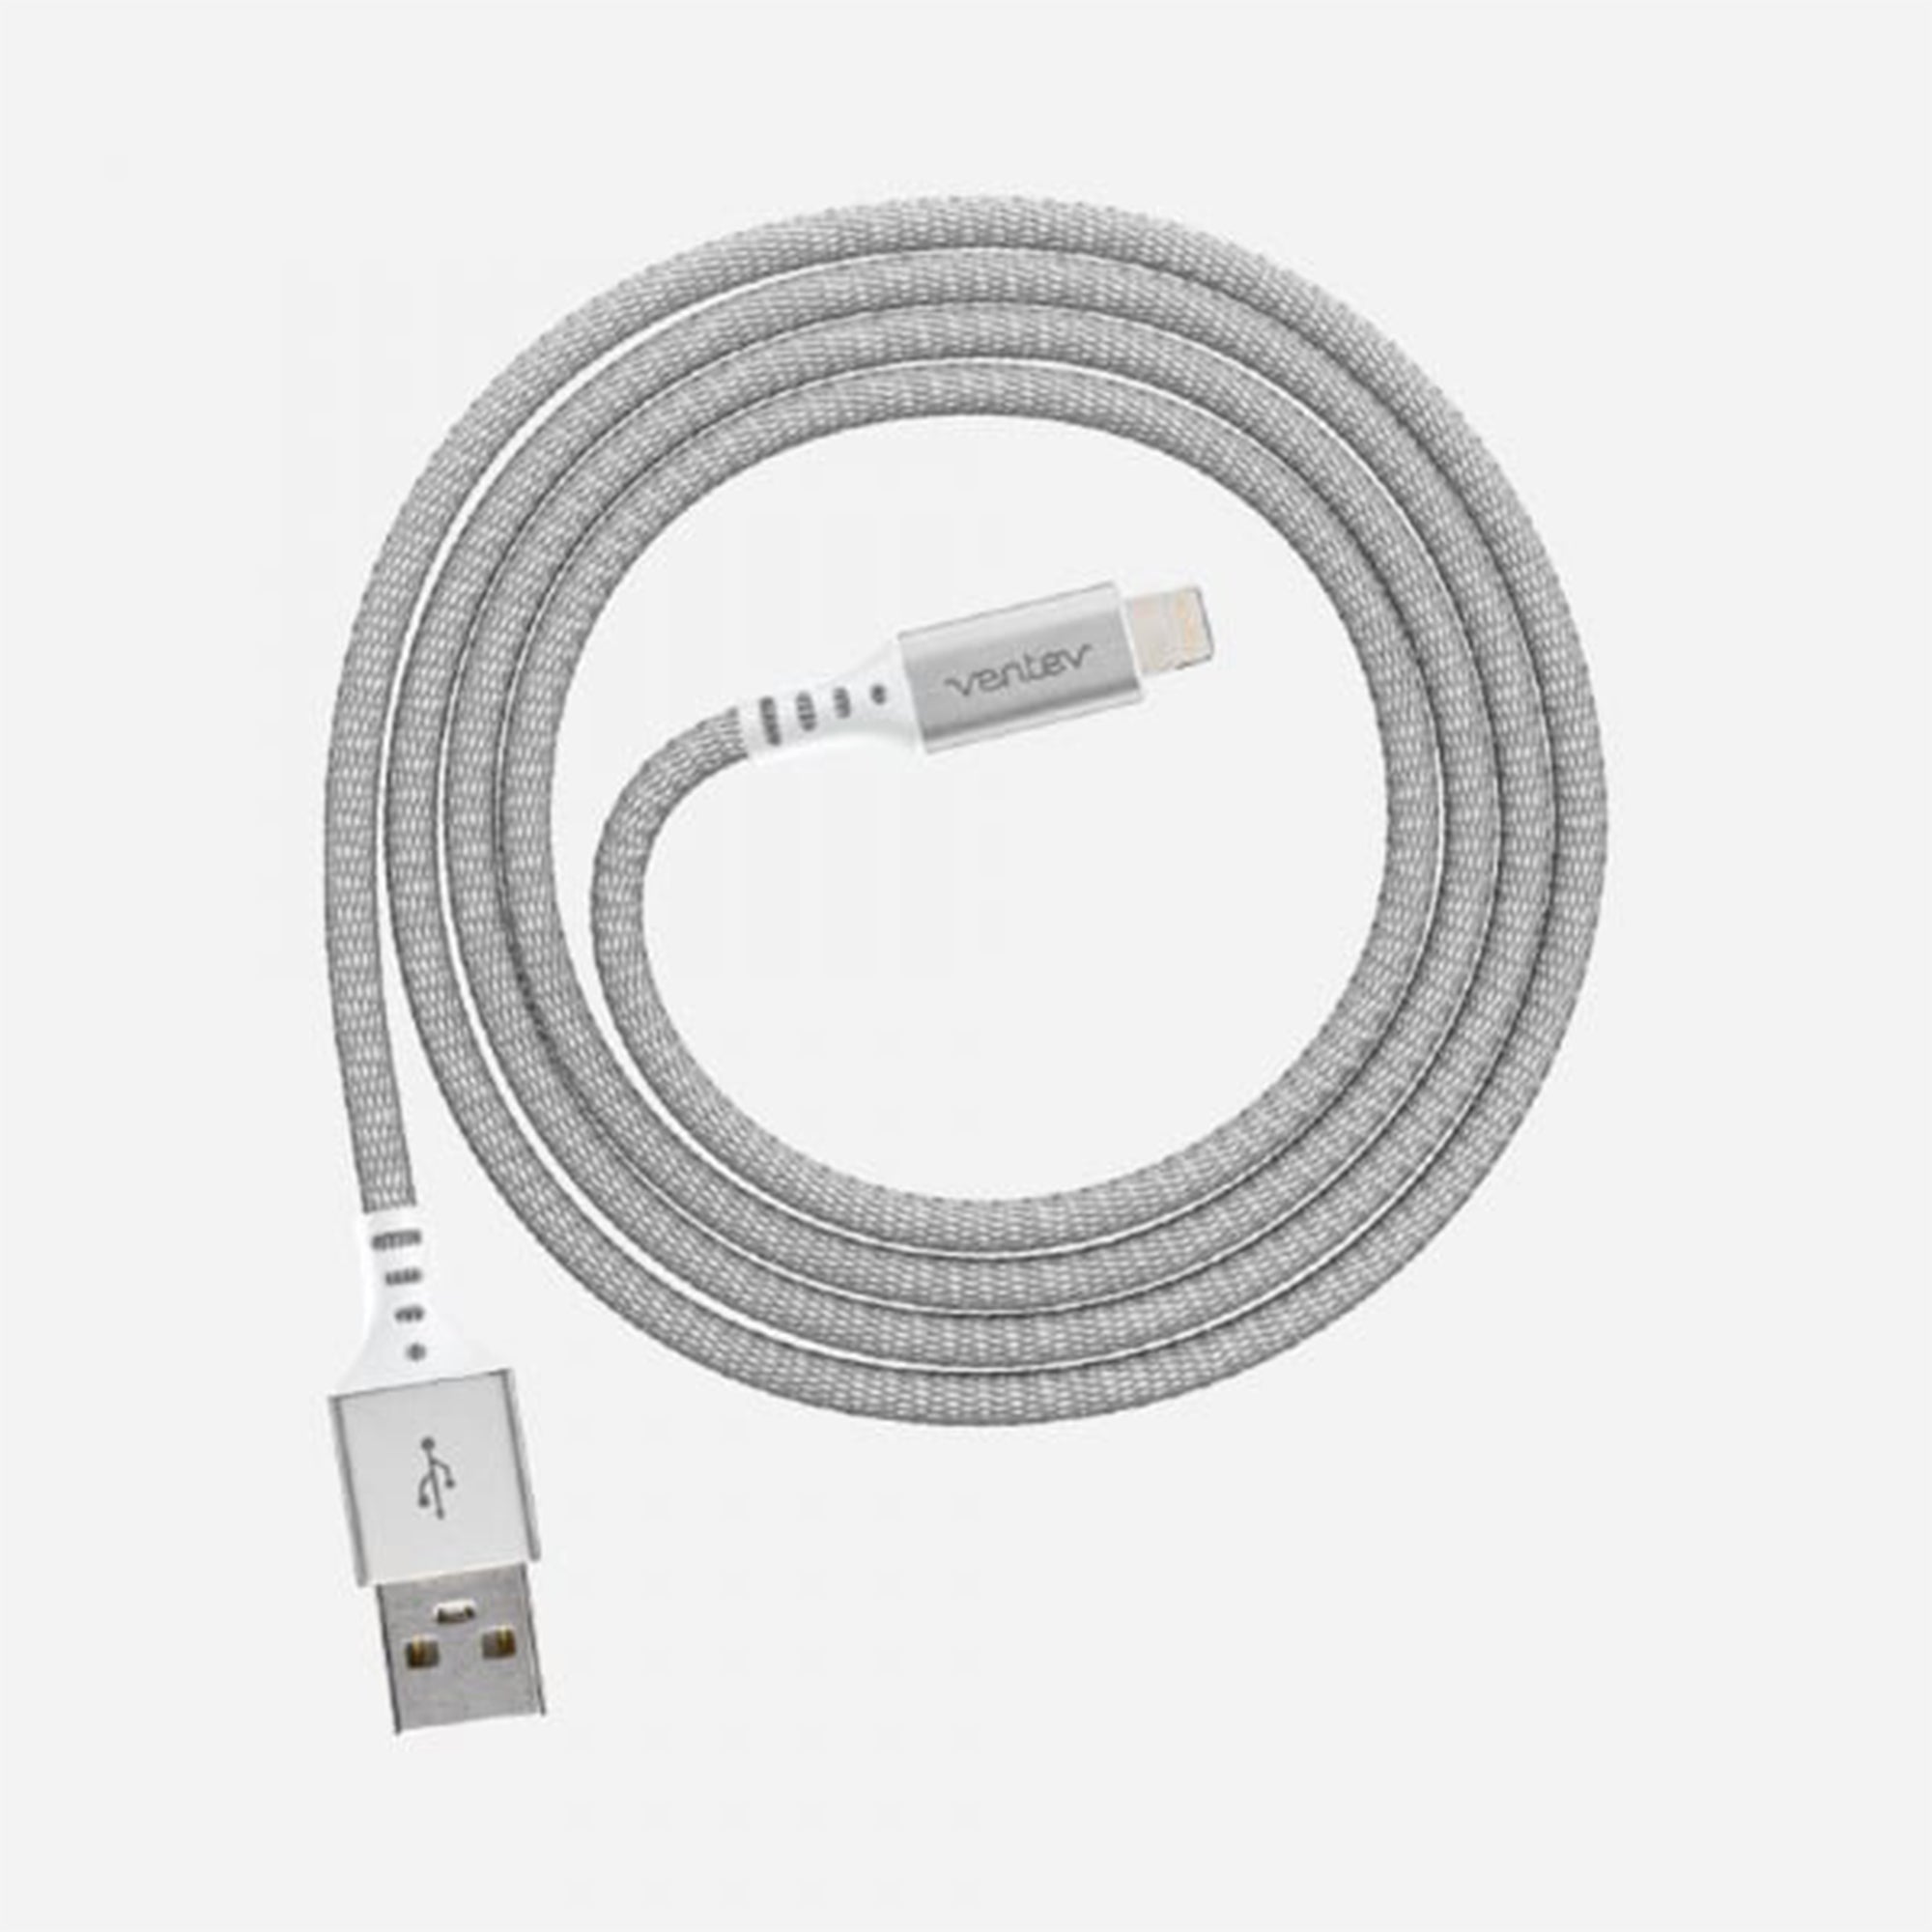 Ventev Charge and Sync Alloy Lightning Cable